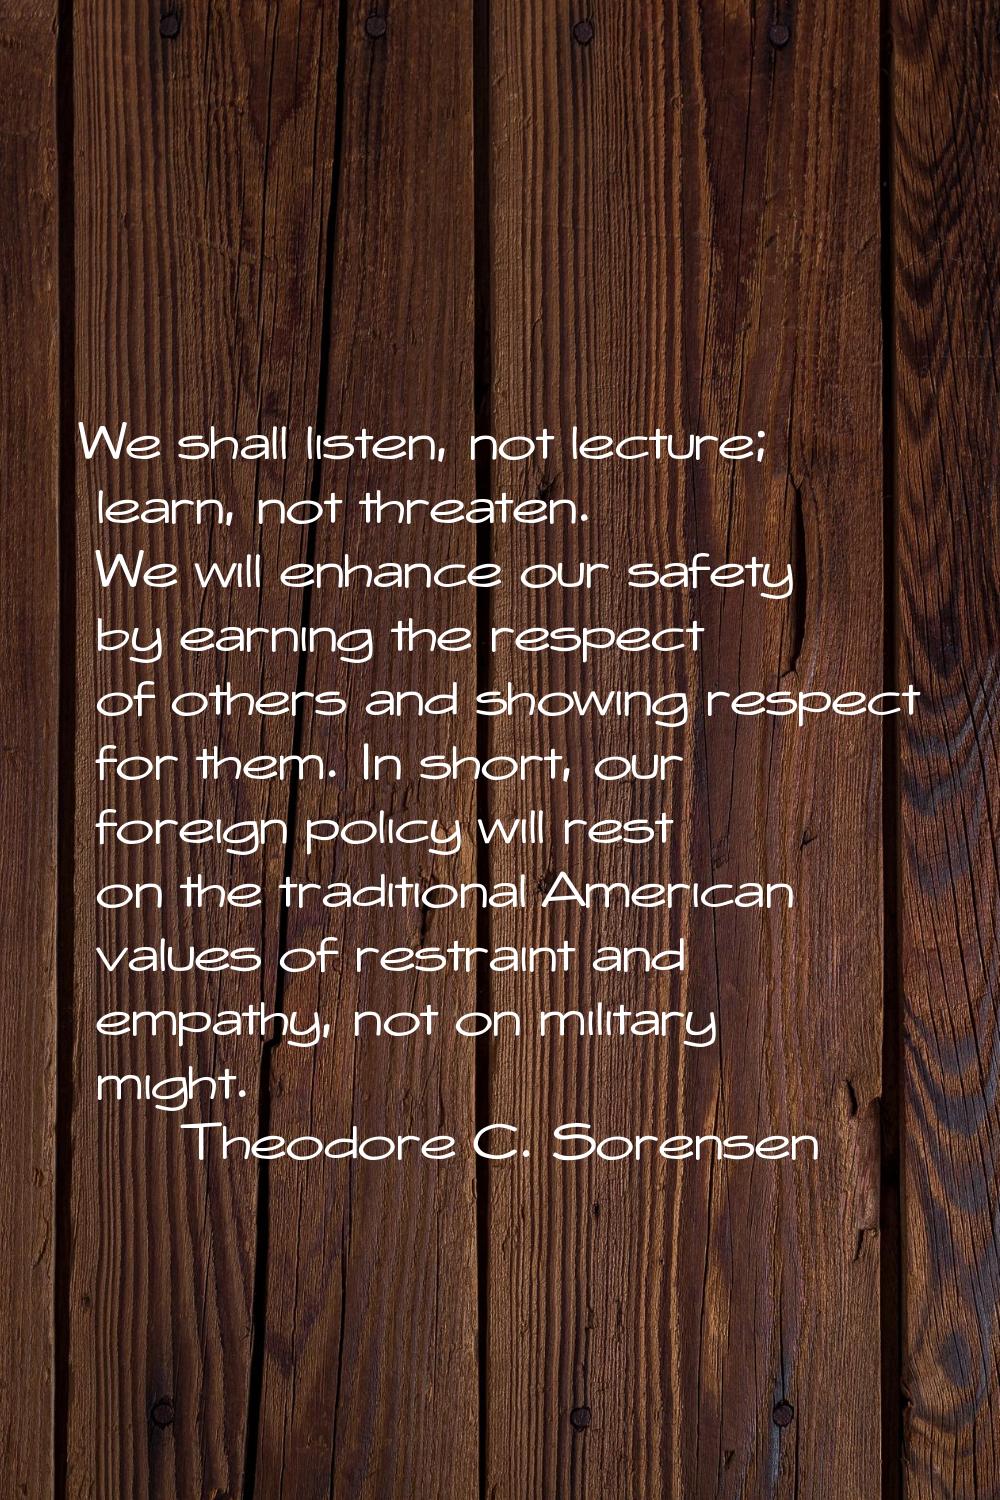 We shall listen, not lecture; learn, not threaten. We will enhance our safety by earning the respec